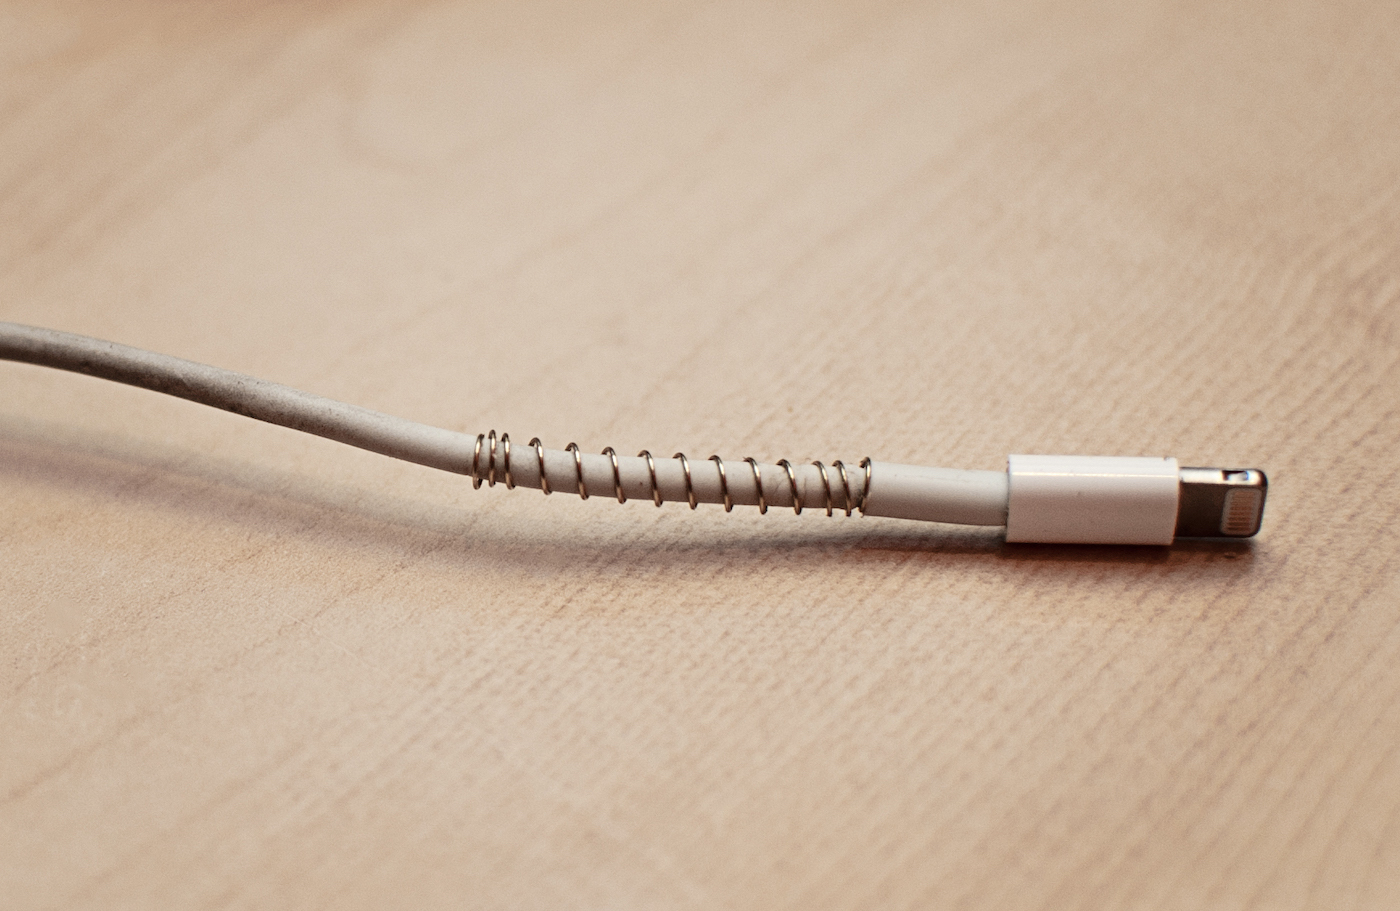 use pen spring on cord to prevent damage and breakage